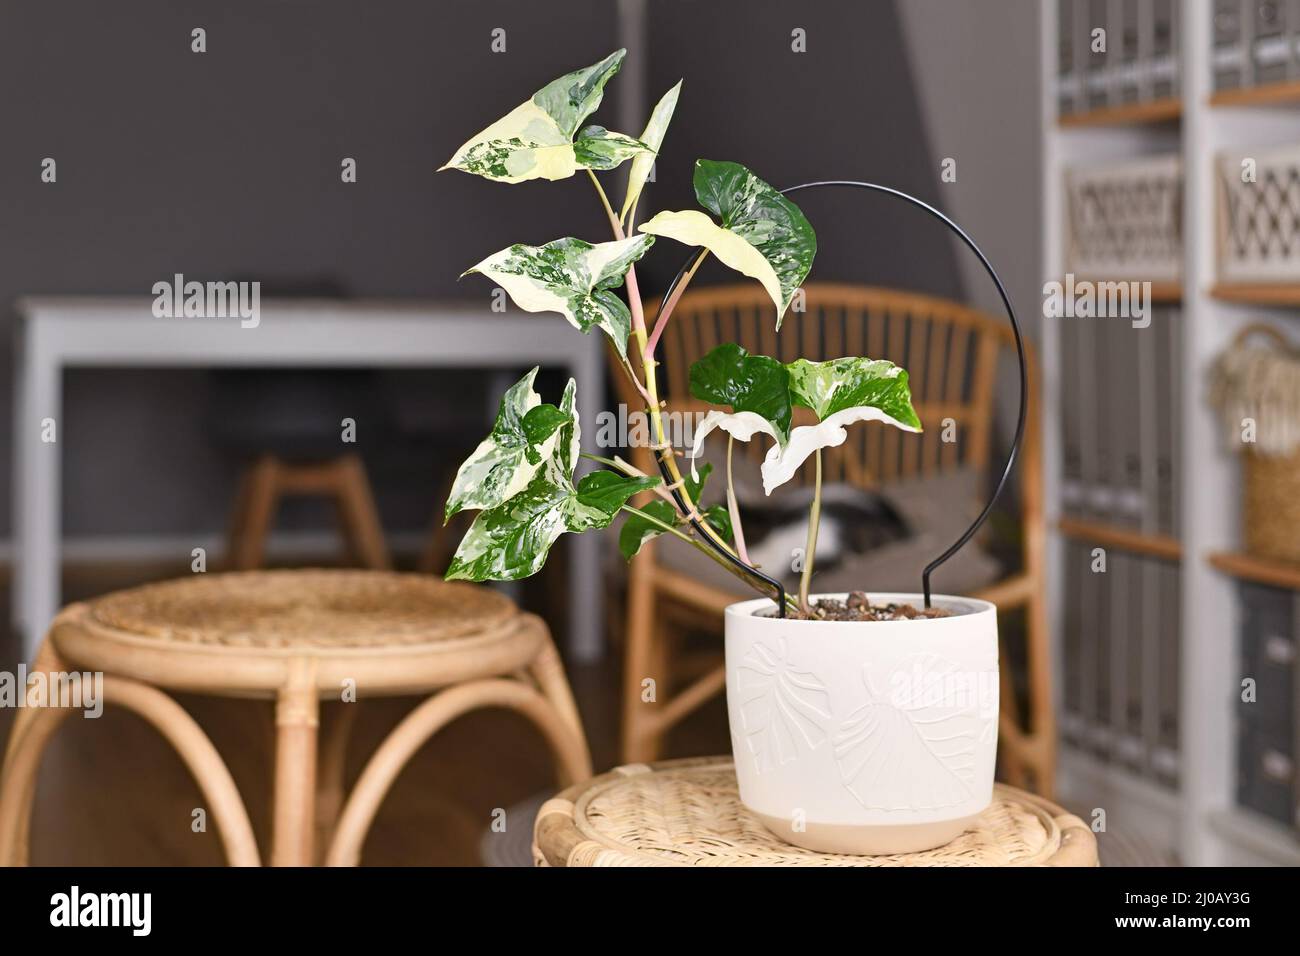 Potted exotic 'Syngonium Podophyllum Variegata' houseplant with white spots in flower pot on table in living room with copy space Stock Photo